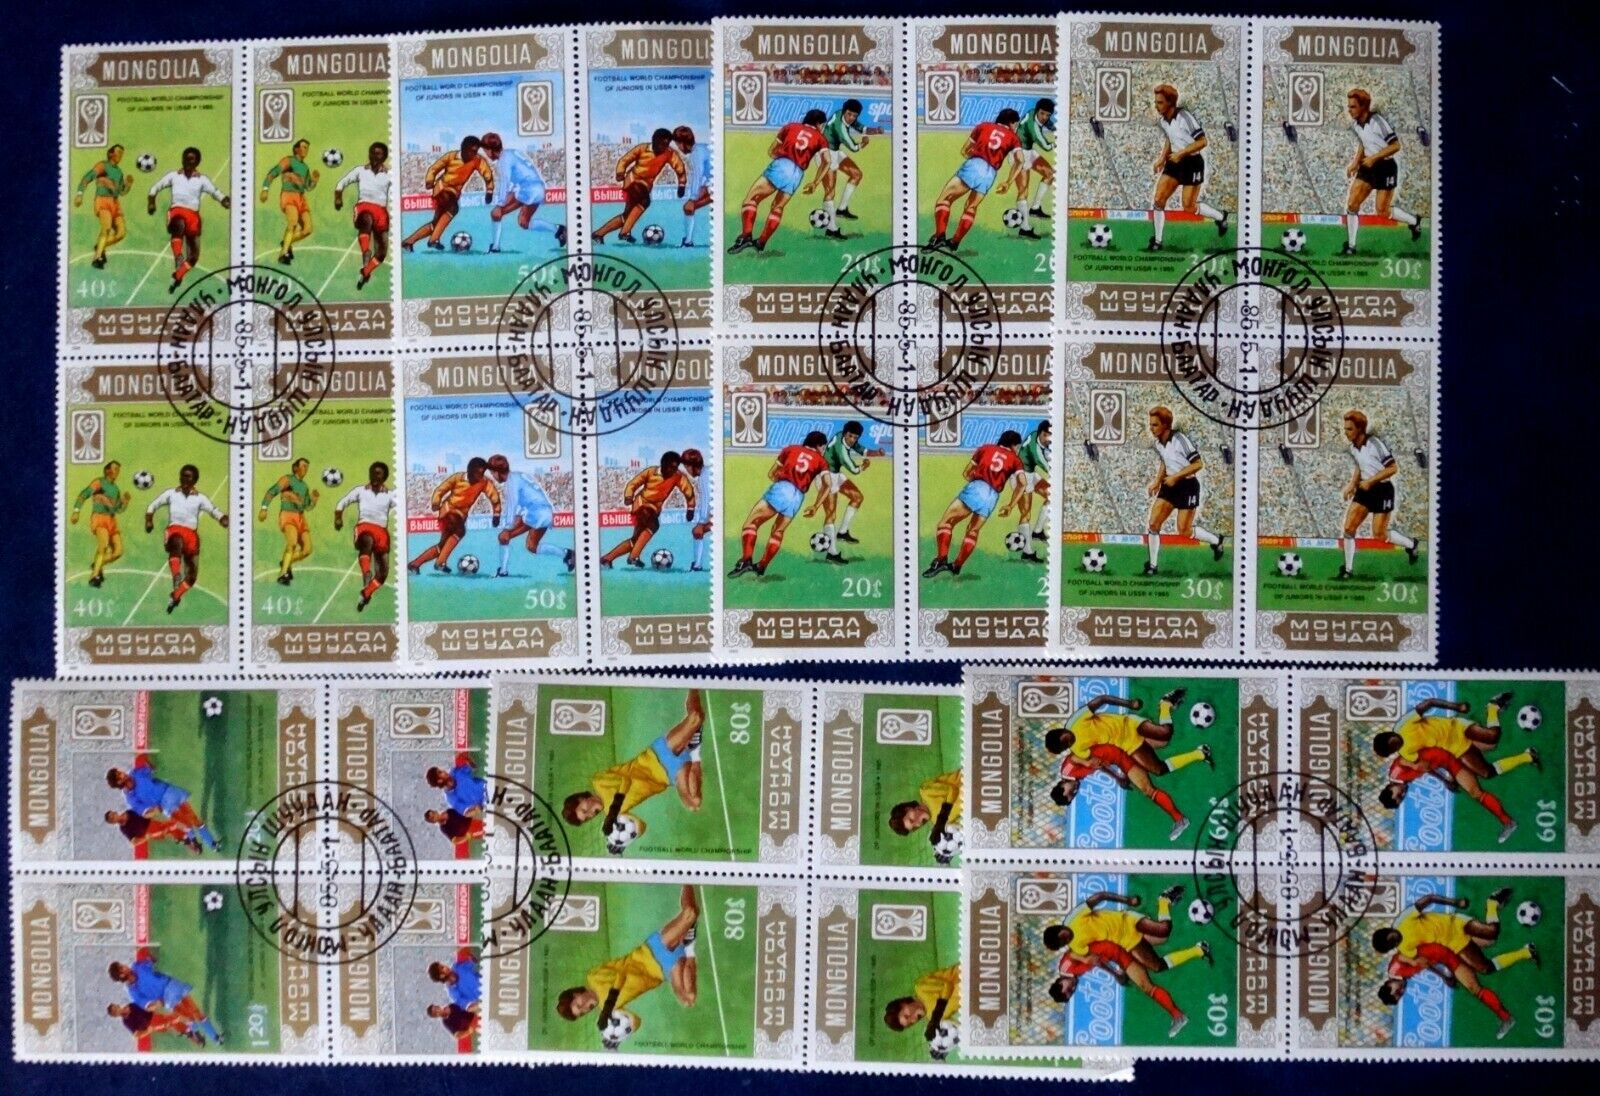 MONGOLIA1985 Junior World Football Championships Moscow stamp se